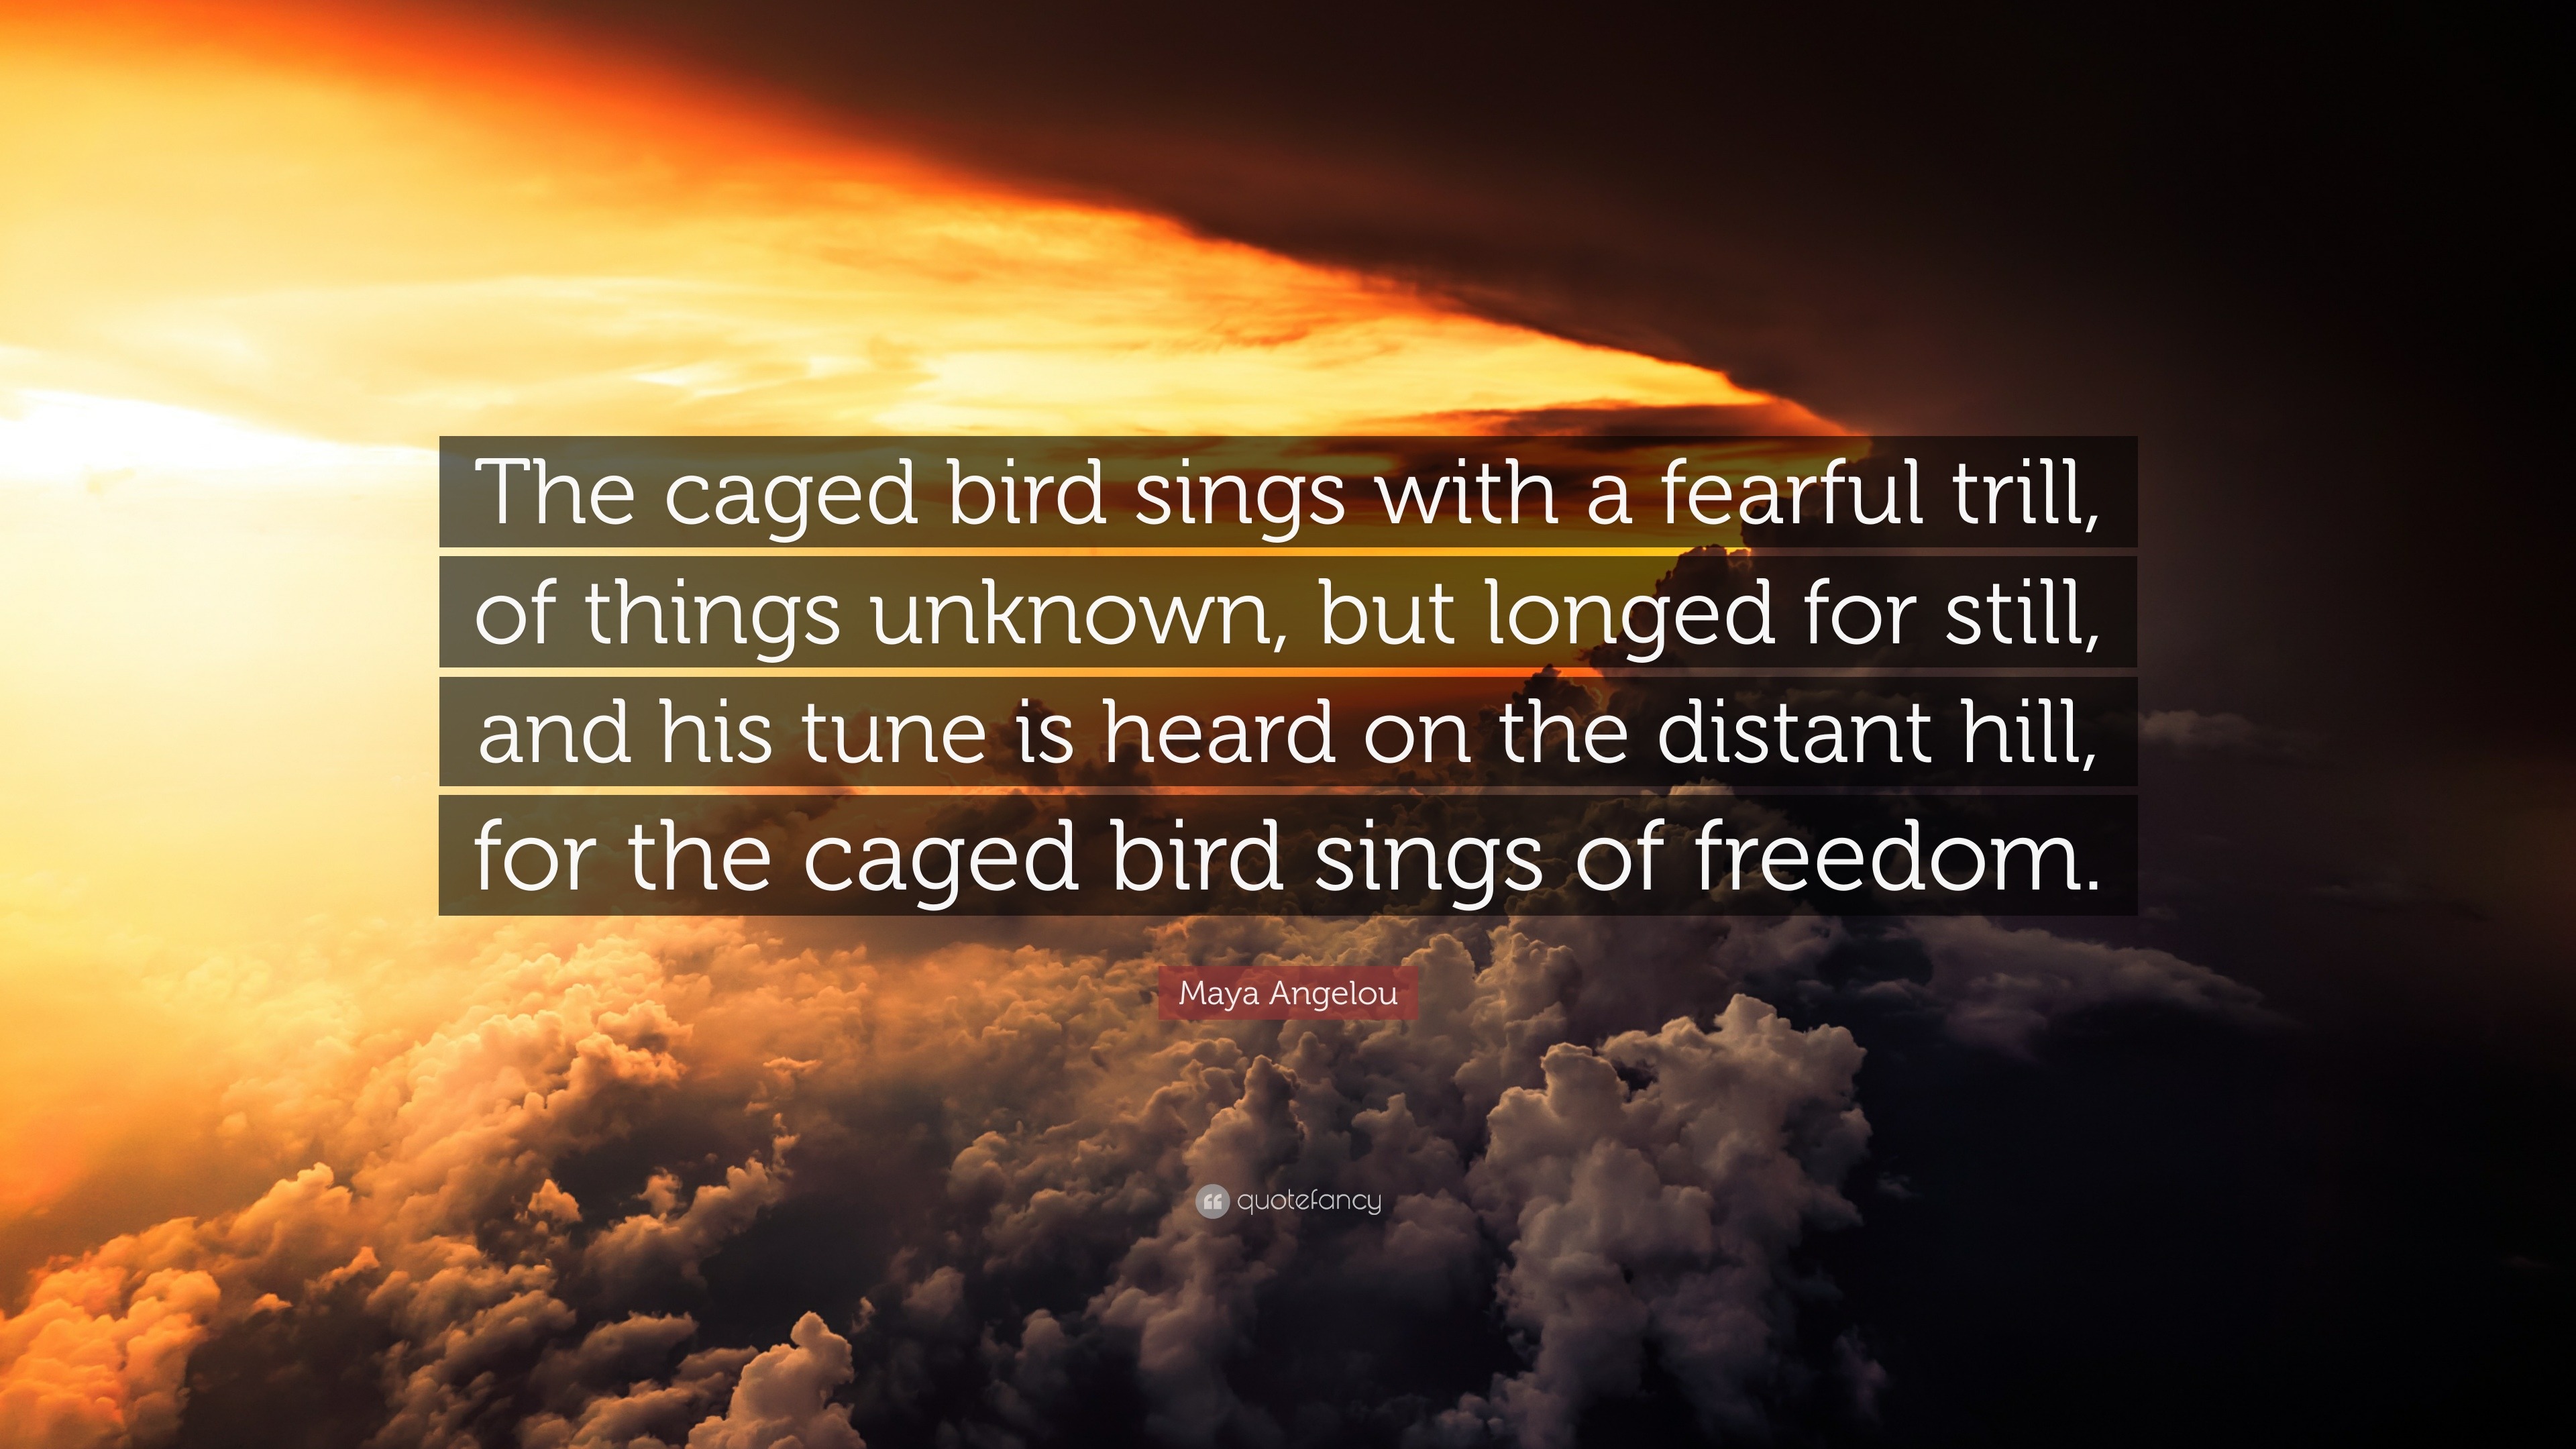 the caged bird sings with a fearful trill